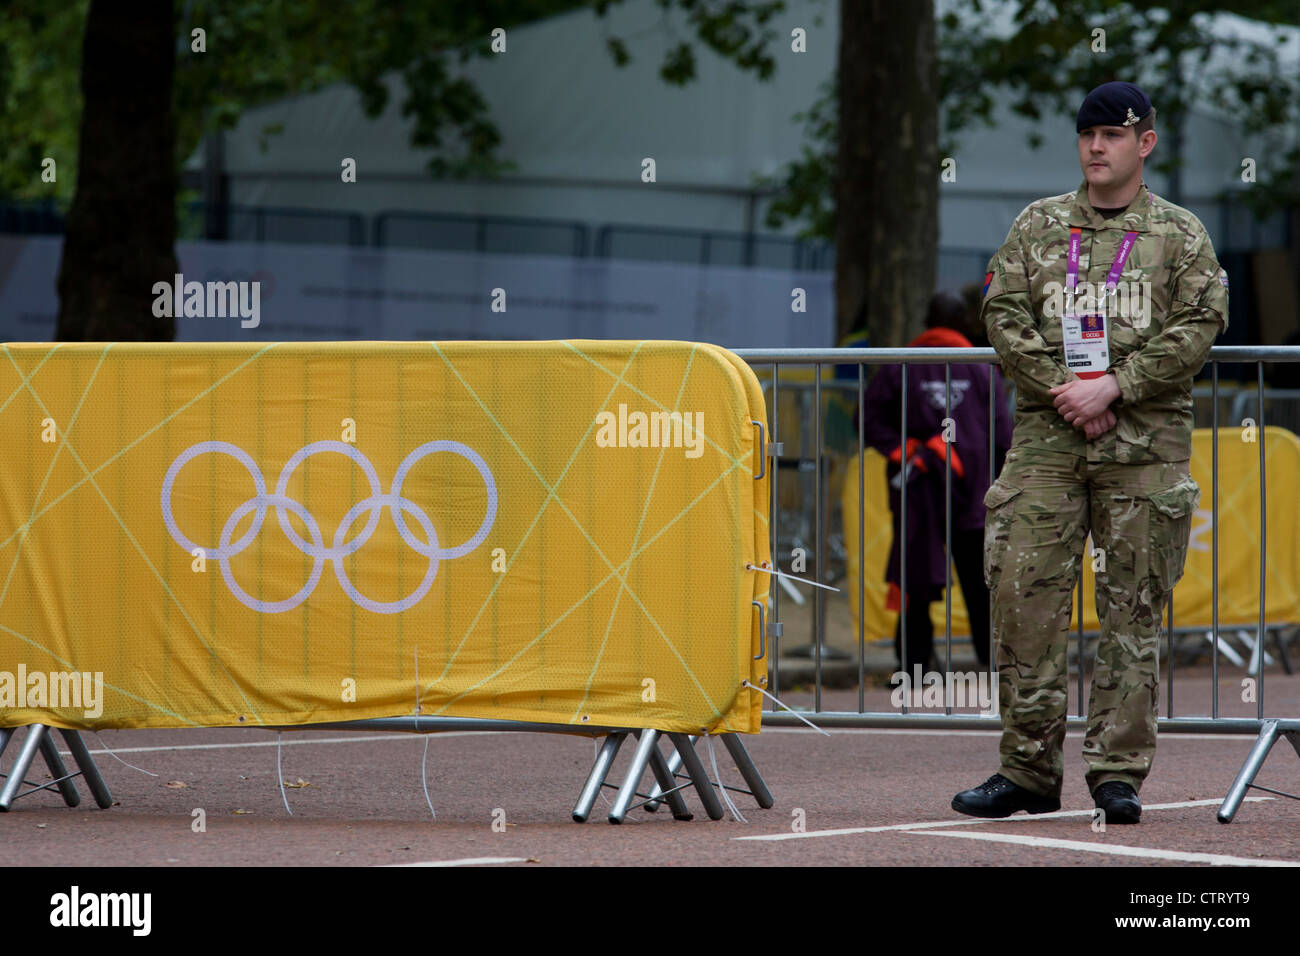 A soldier of the Royal Artillery regiment in the British army stand guarding the entrance to the volleyball venue in central London next to the IOC rings logo on day 4 of the London 2012 Olympic Games. A further 1,200 military personnel are being deployed to help secure the 2012 Olympics in London following the failure by security contractor G4S to provide enough private guards. The extra personnel have been drafted in amid continuing fears that the private security contractor's handling of the £284m contract remains a risk to the Games. Stock Photo